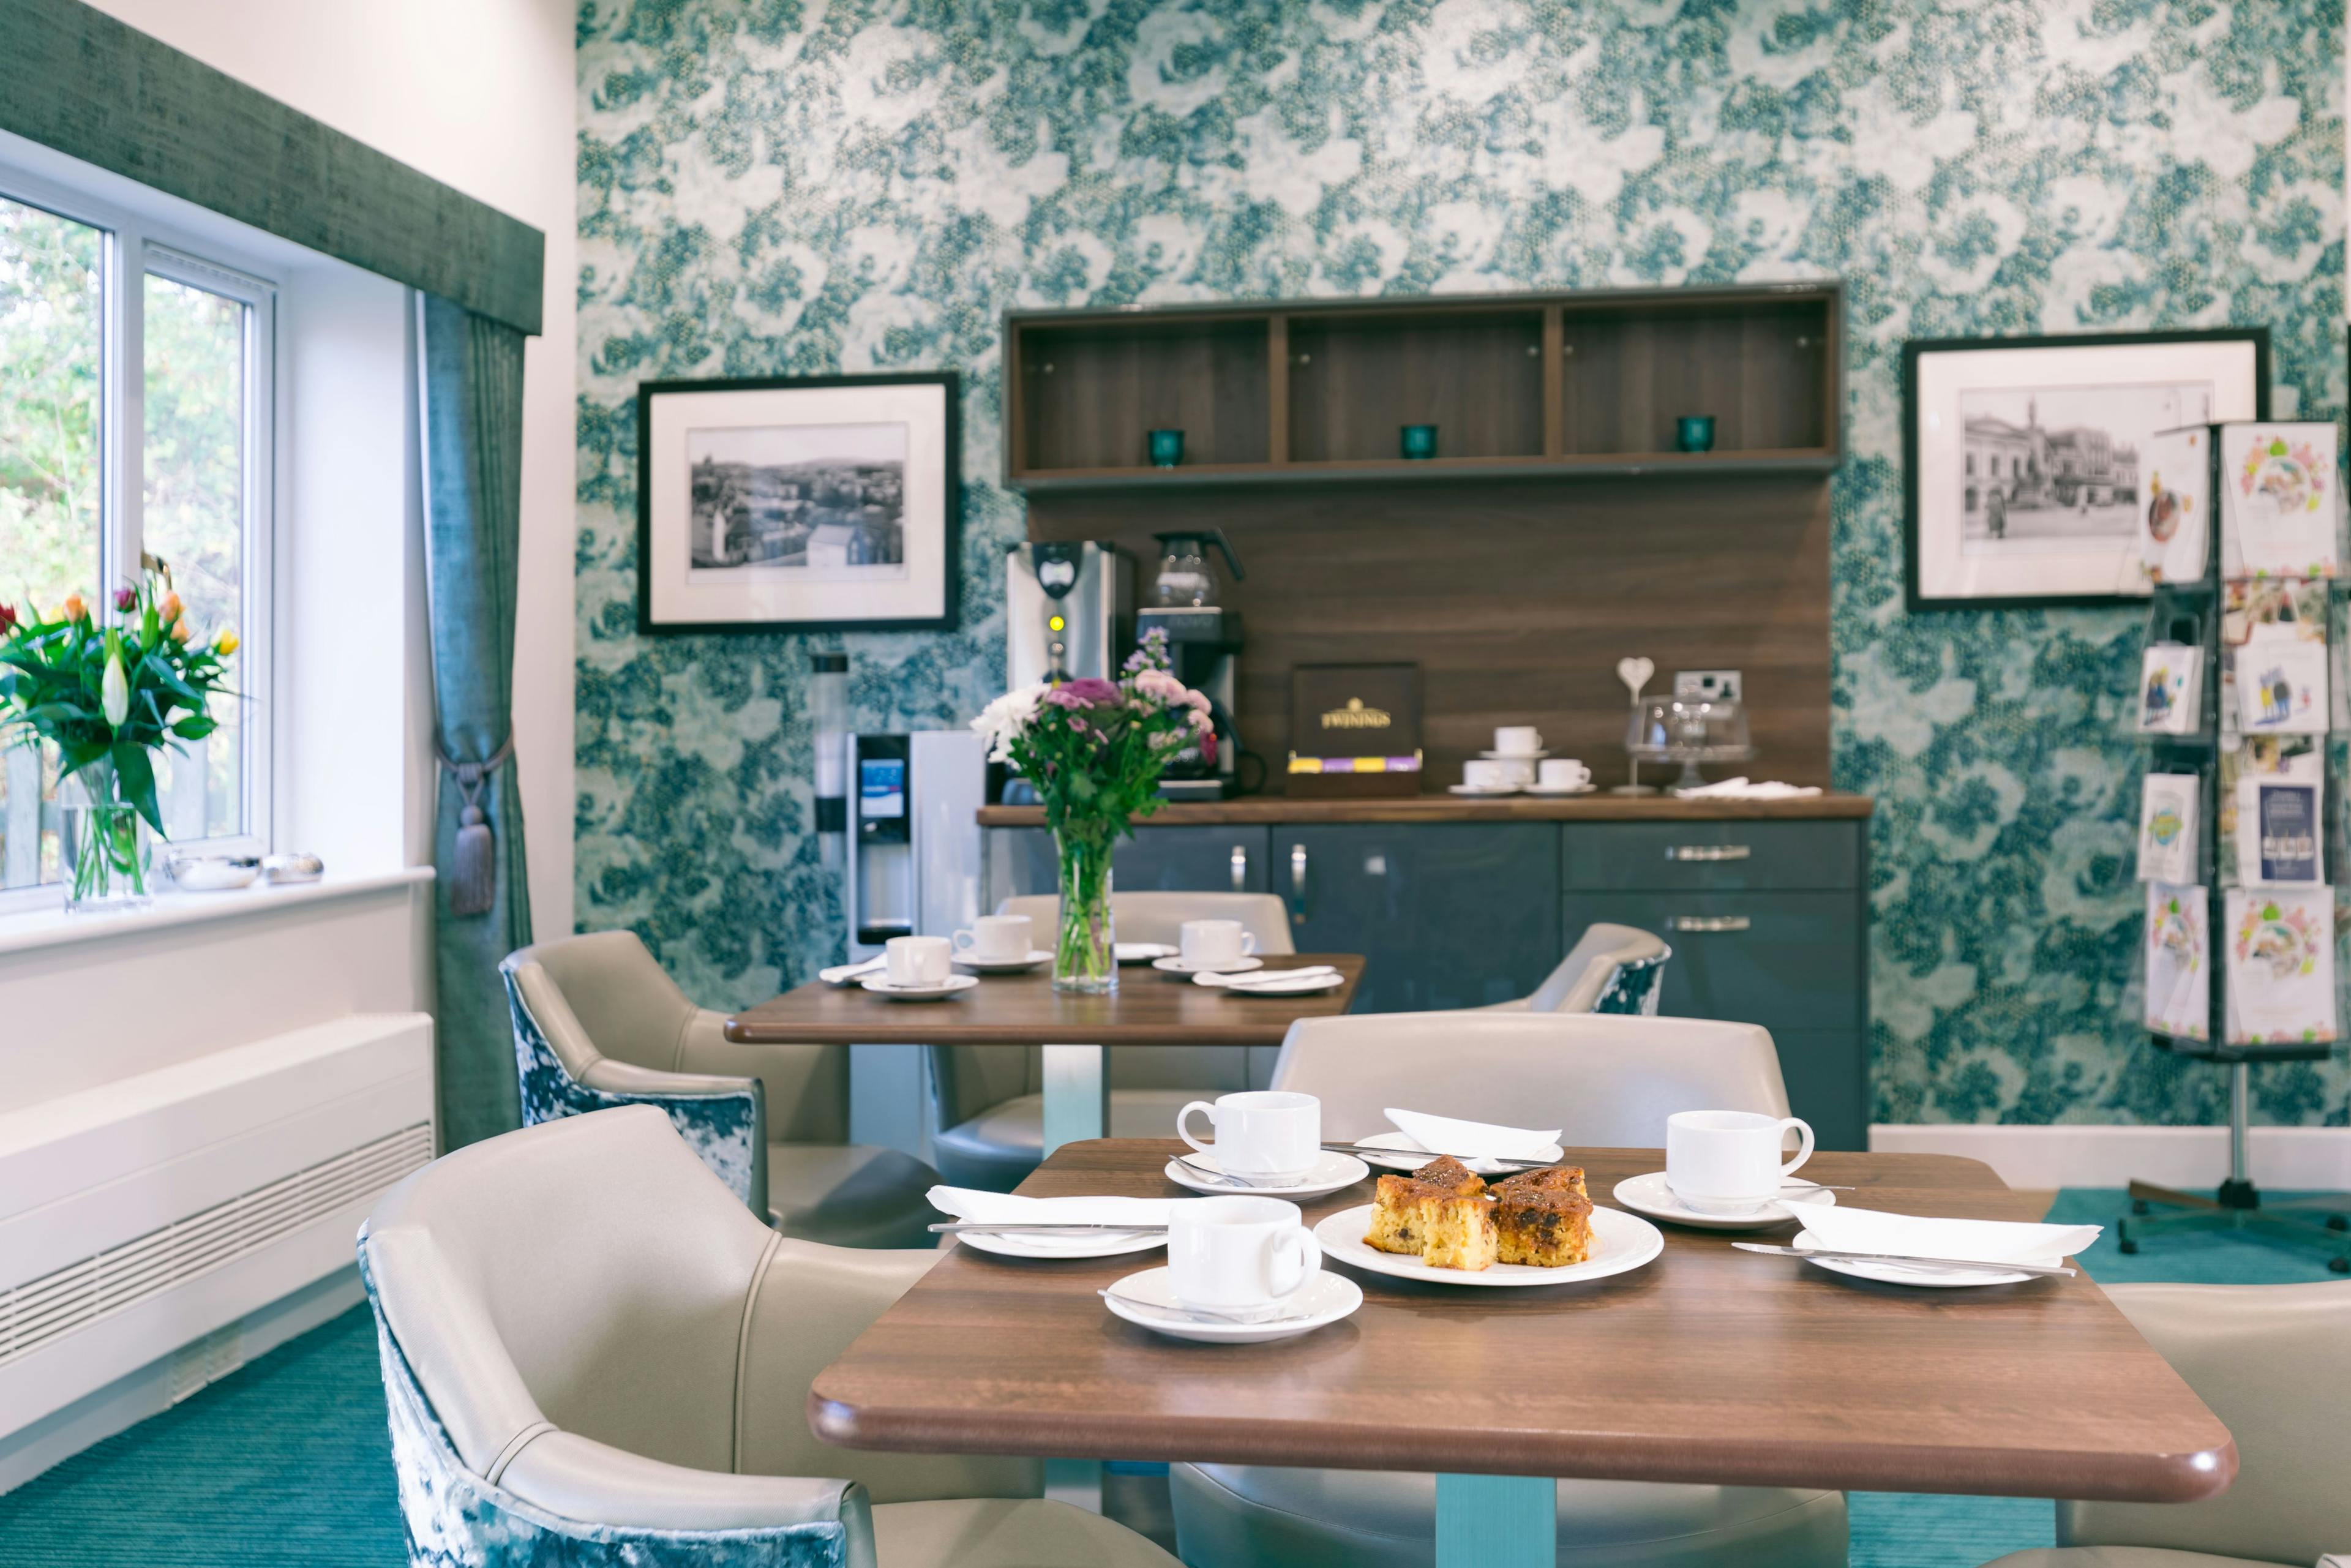 Cafe Bar of Vecta House Care Home in Newport, Isle of Wight